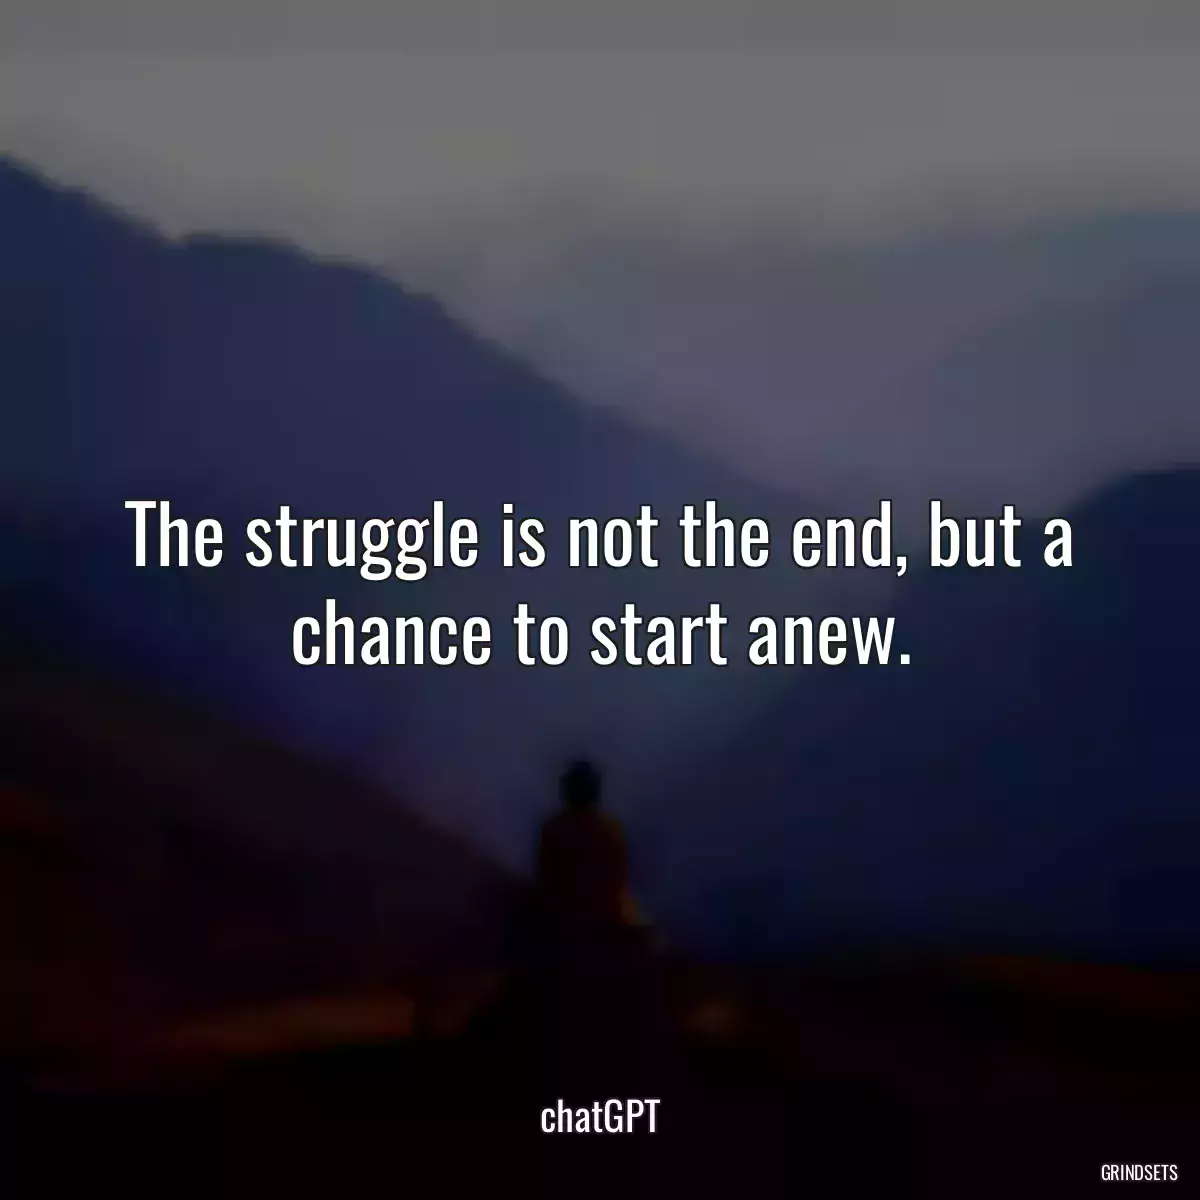 The struggle is not the end, but a chance to start anew.